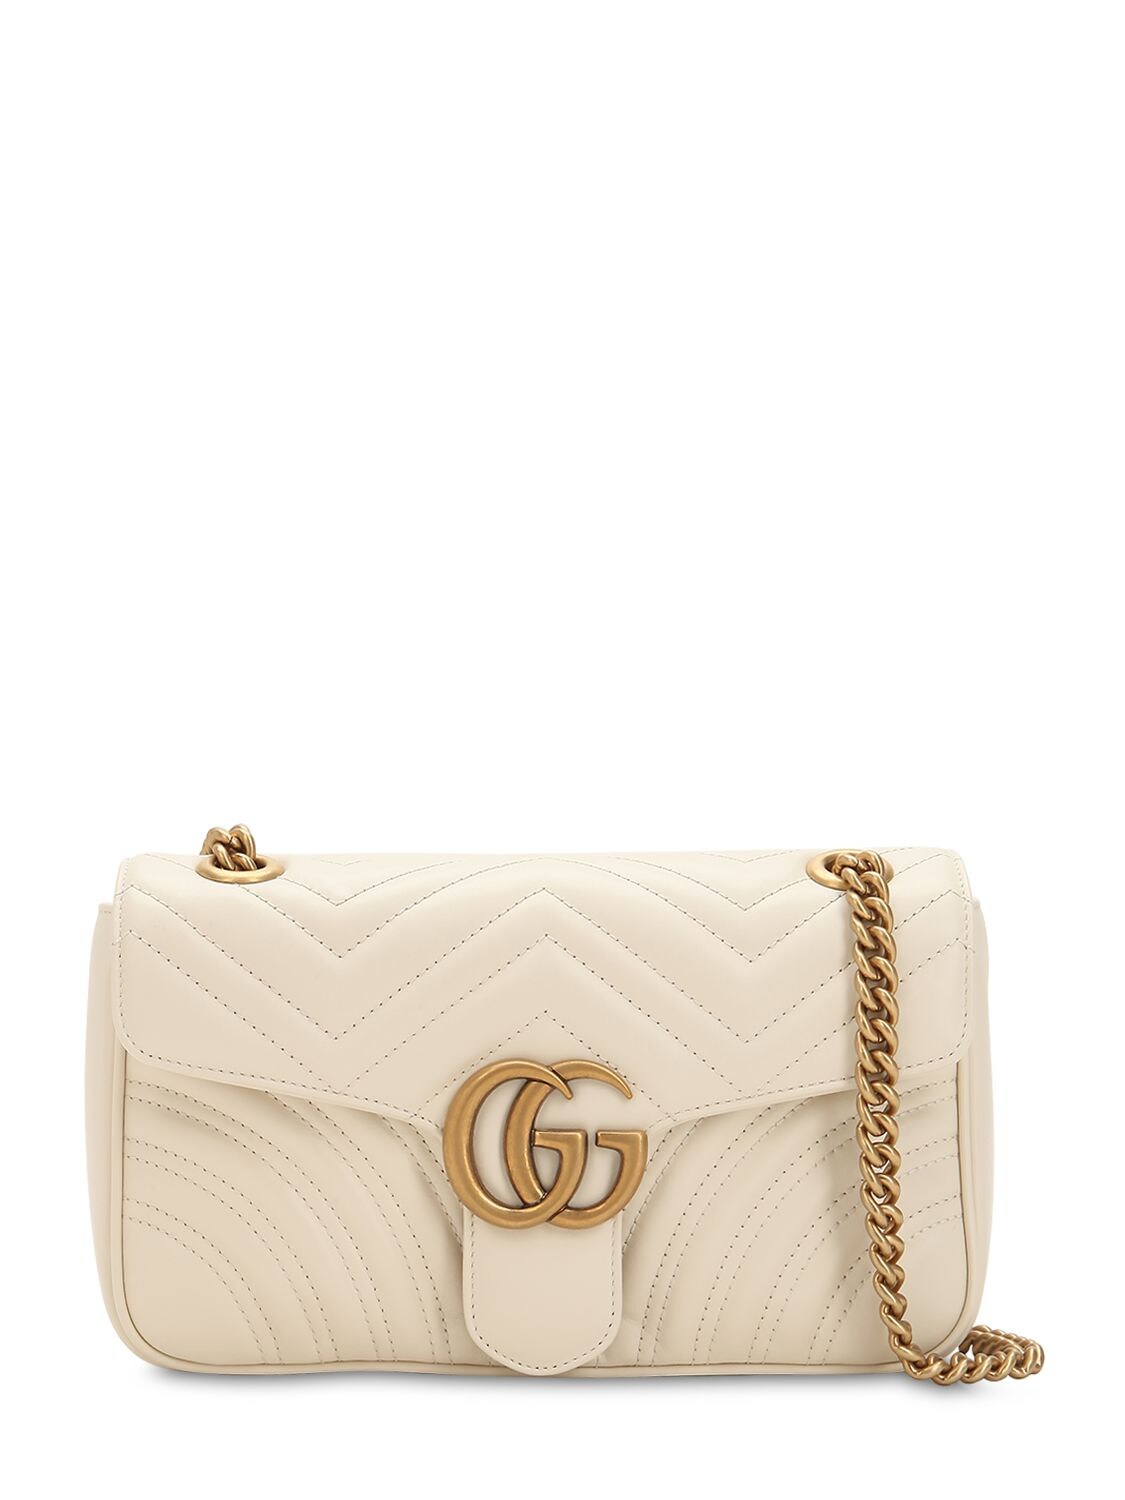 Gucci Small Gg Marmont 2.0 Leather Bag In White